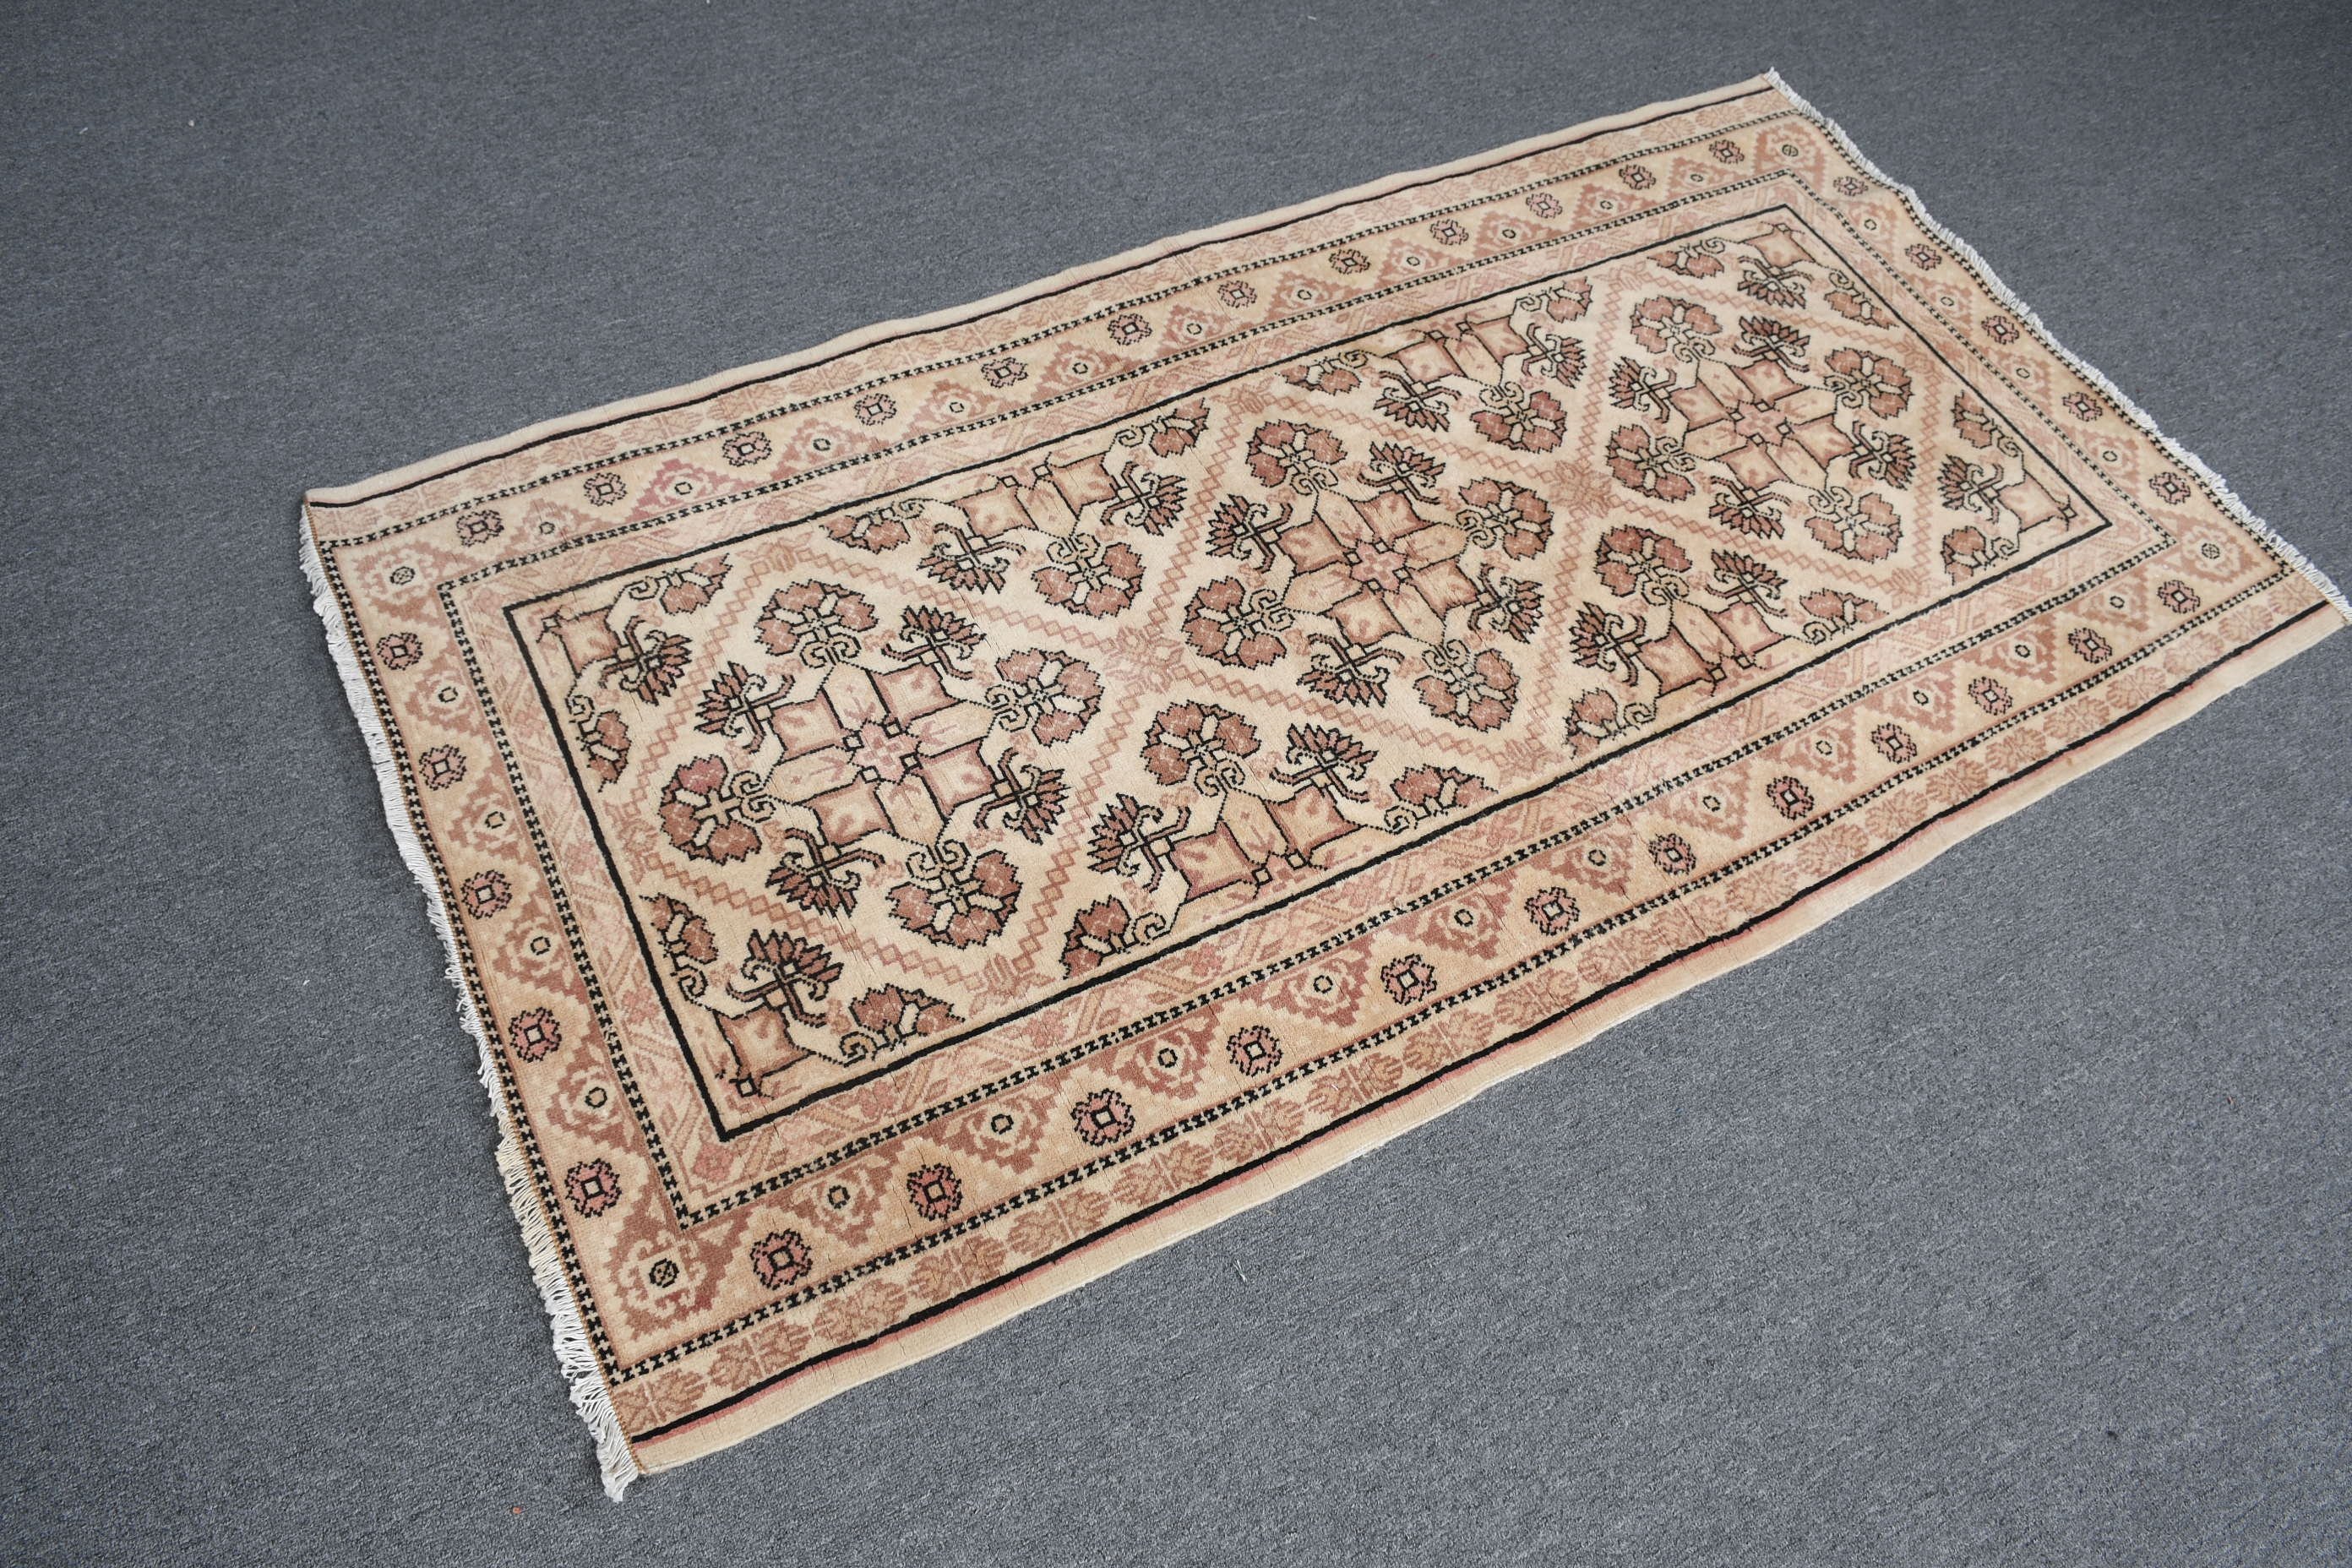 Kitchen Rugs, Rugs for Entry, Vintage Rug, Retro Rugs, Anatolian Rug, Brown  2.9x5.3 ft Accent Rug, Turkish Rugs, Bedroom Rug